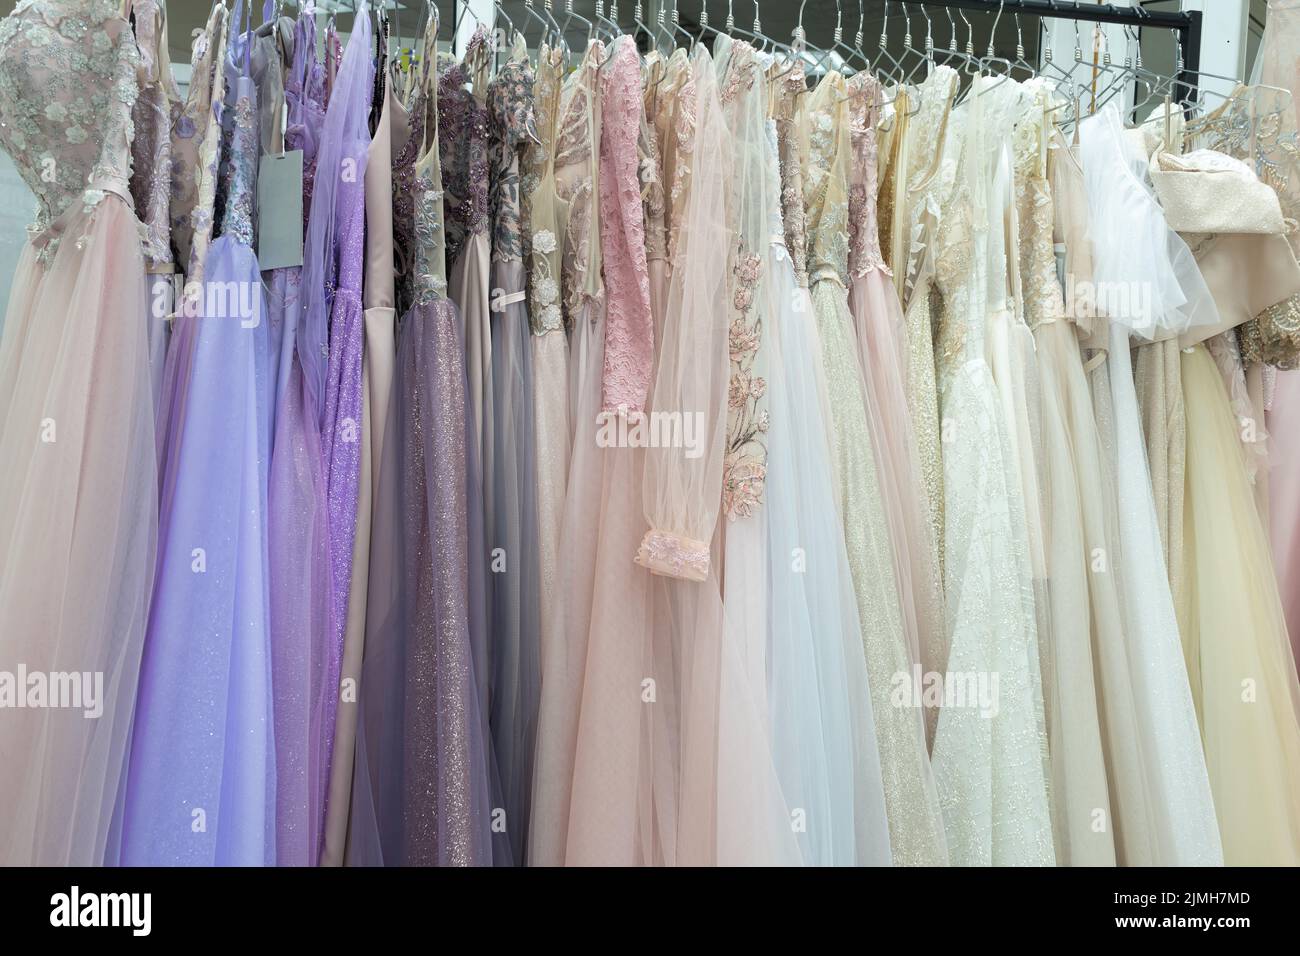 Many different evening and wedding dresses close-up on a hanger in a store Stock Photo